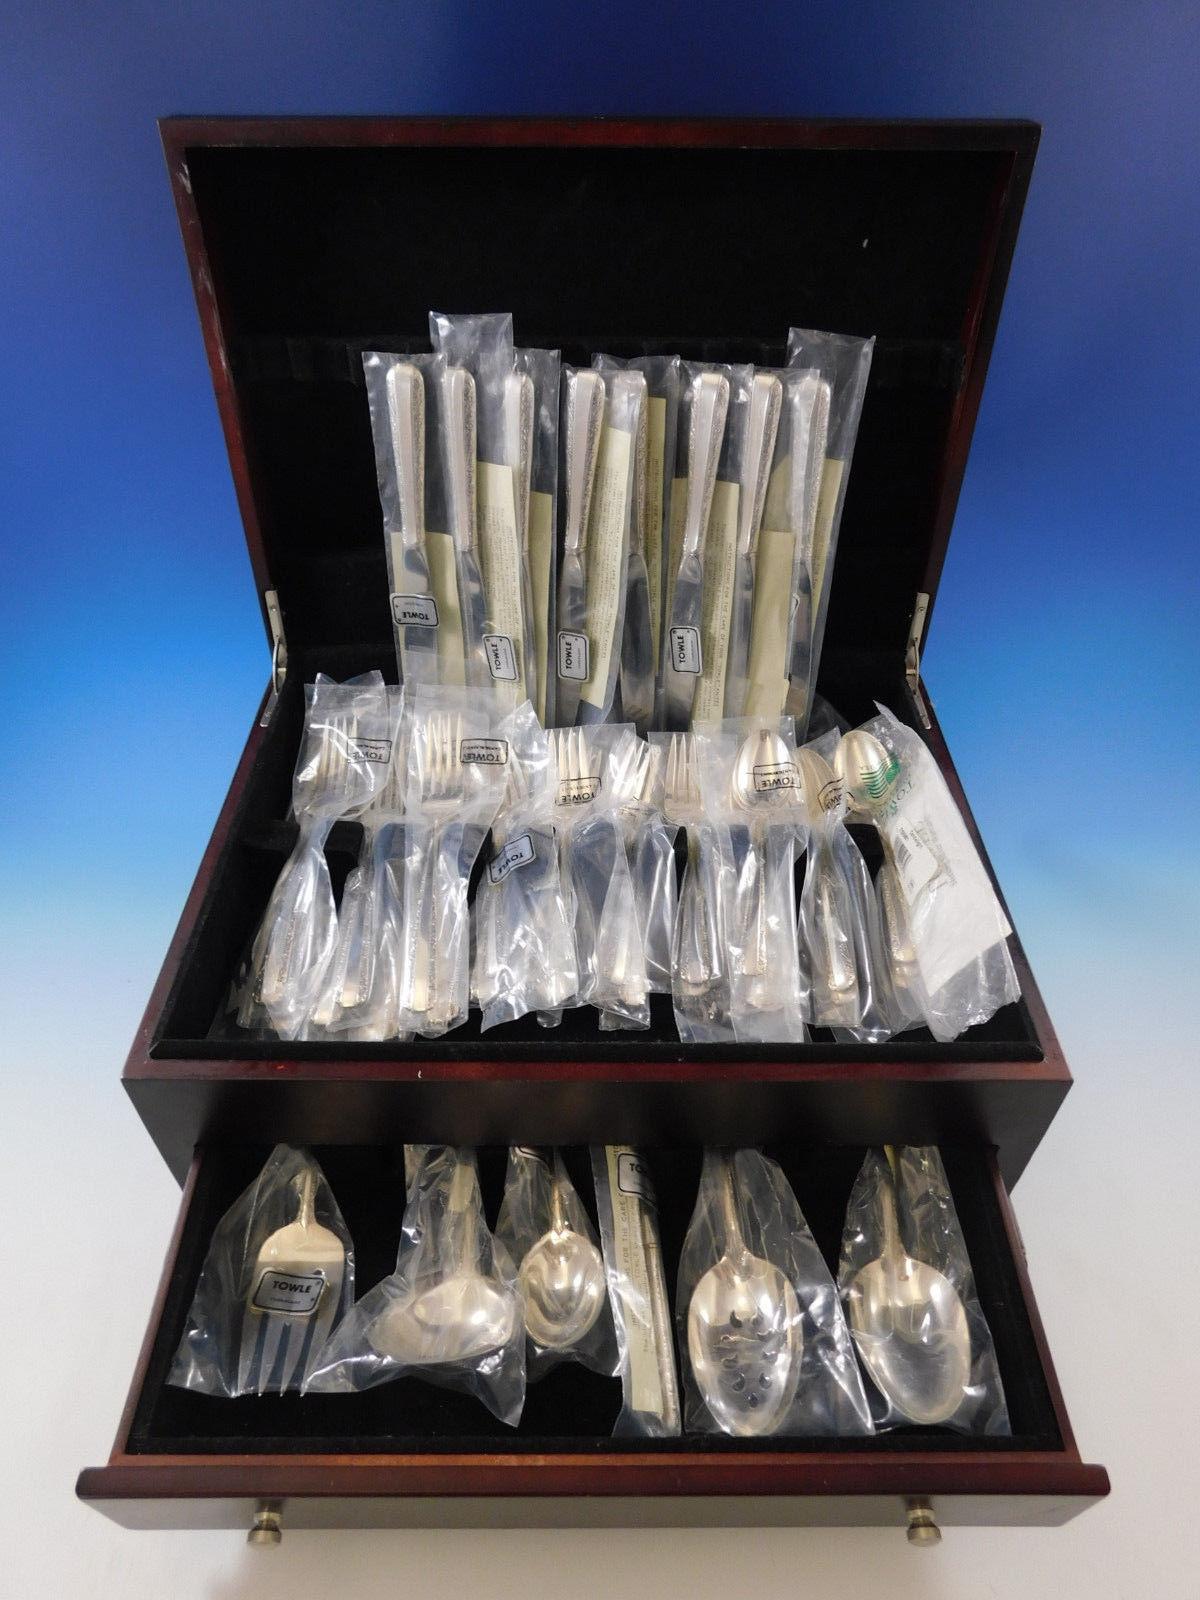 New, unused candlelight by Towle sterling silver flatware set, 38 pieces. This set includes:

8 knives, 8 1/2